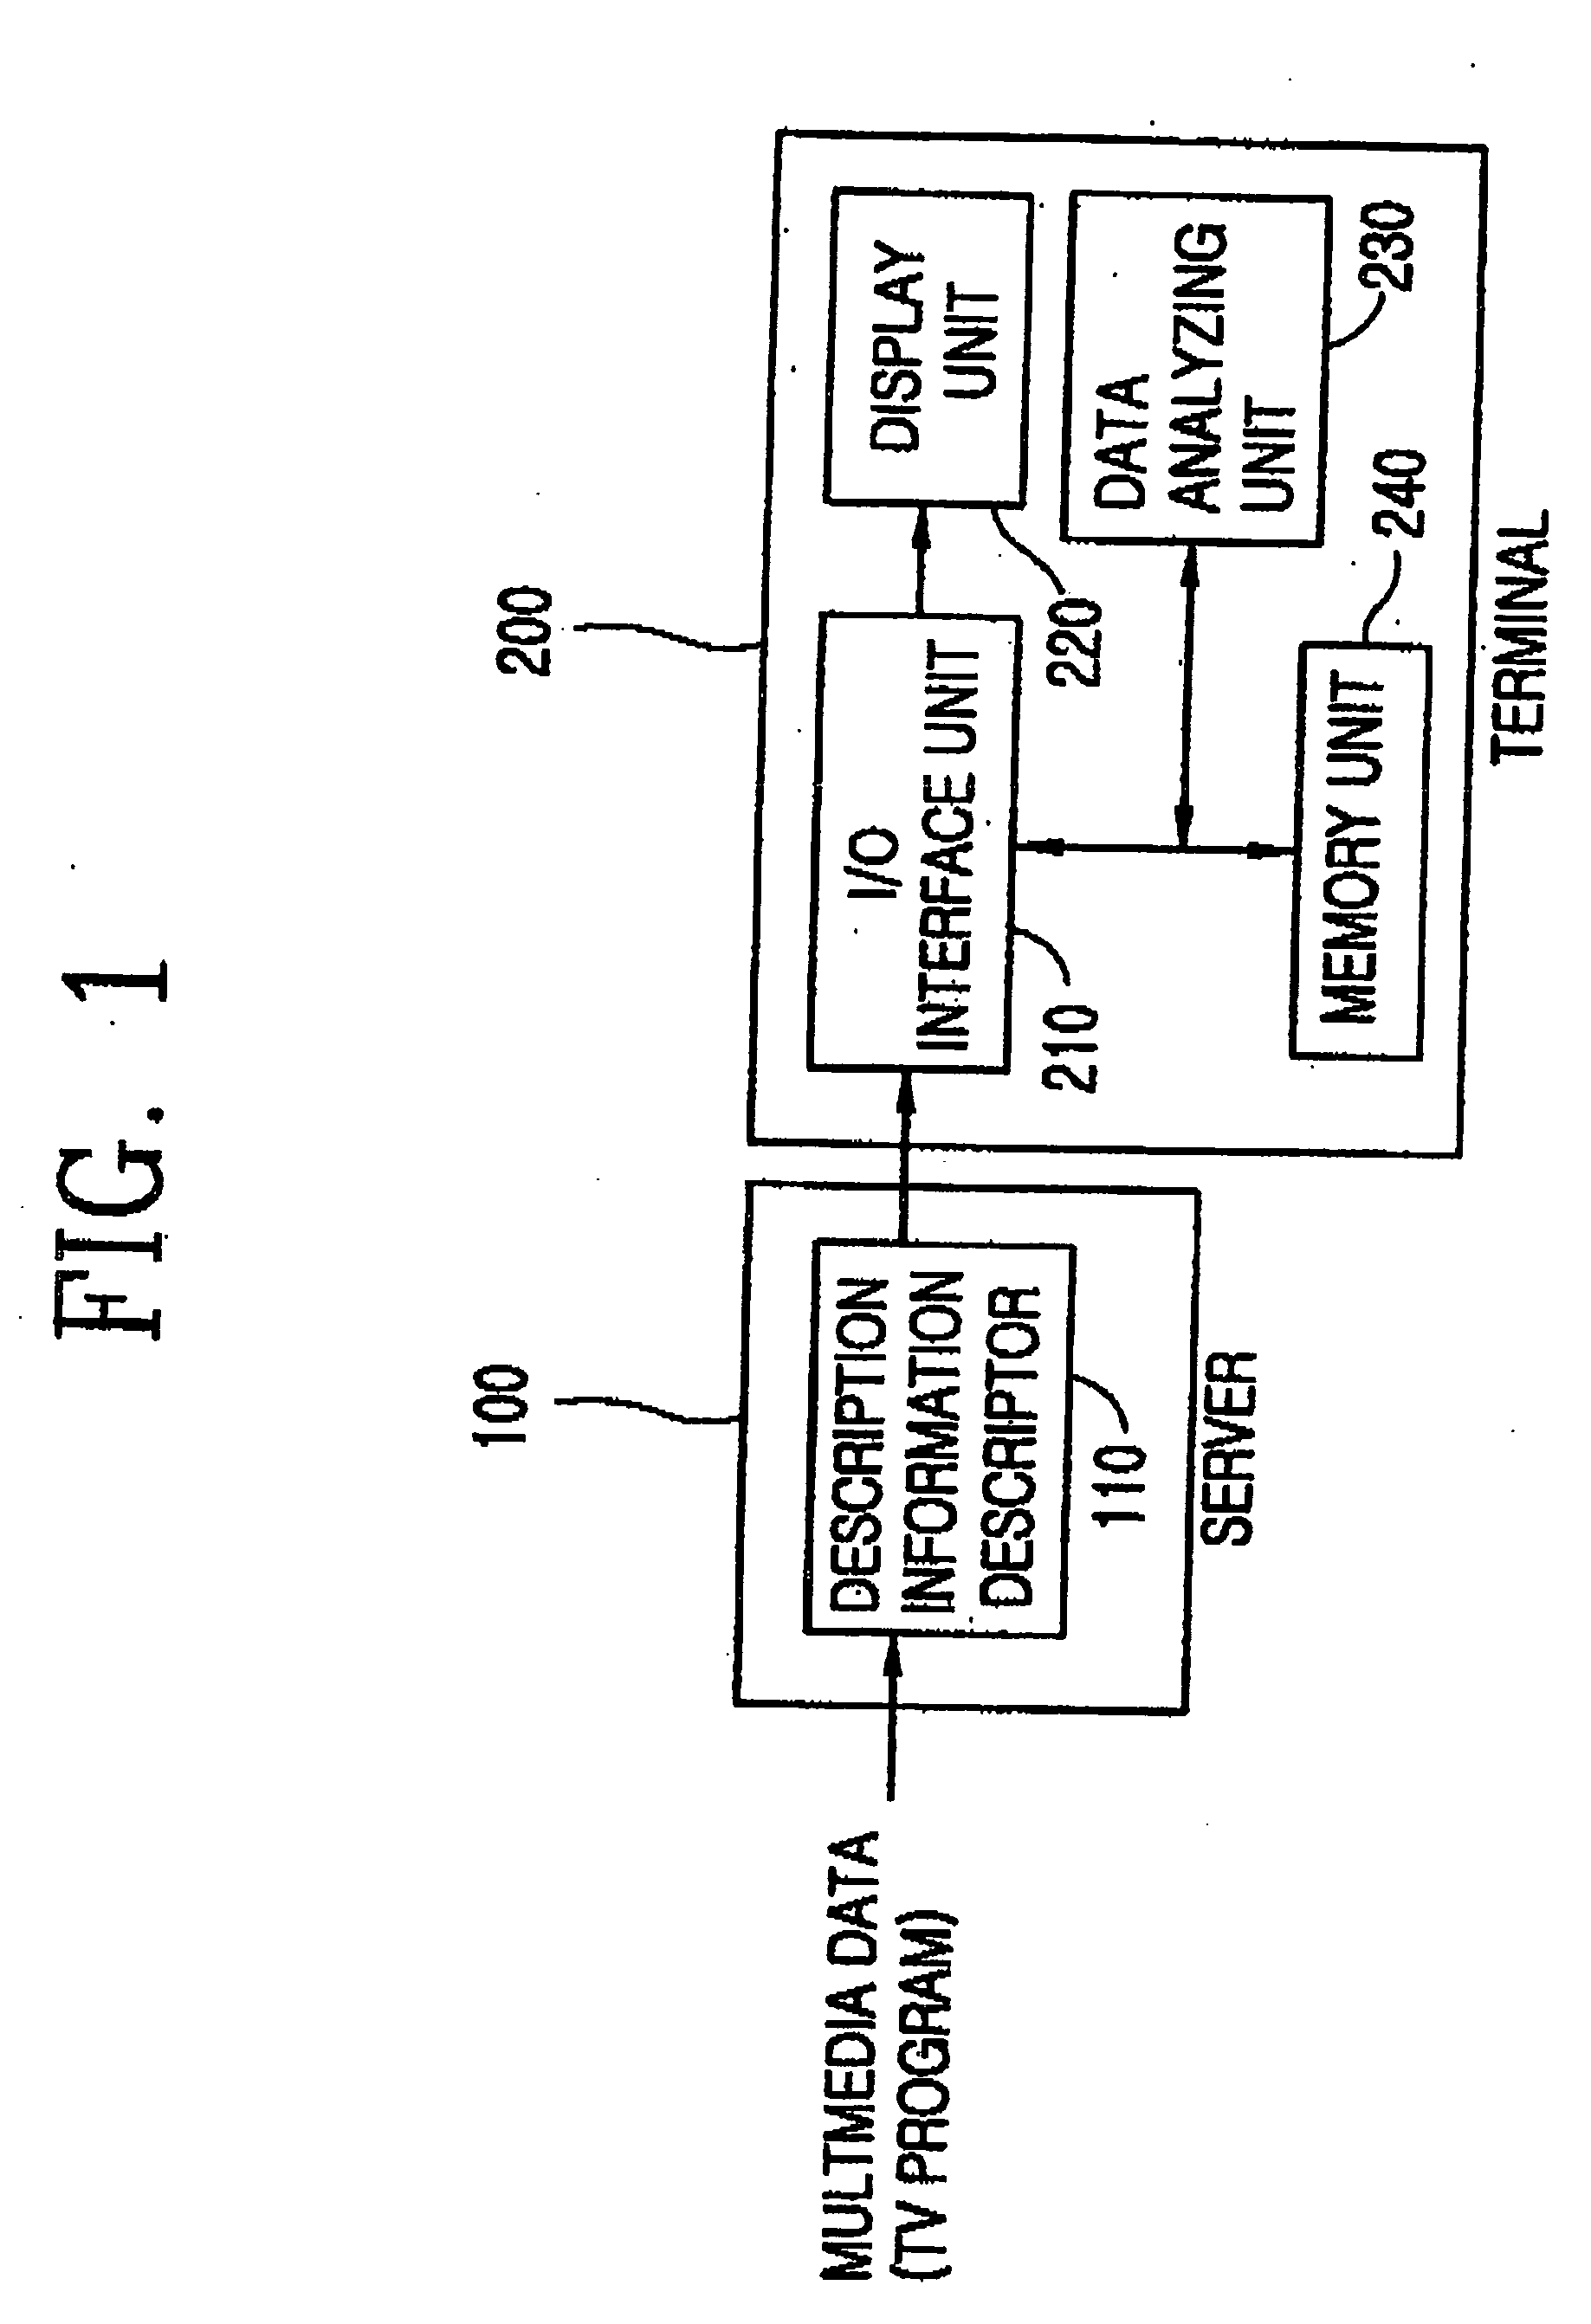 Apparatus and method for processing description information of multimedia data